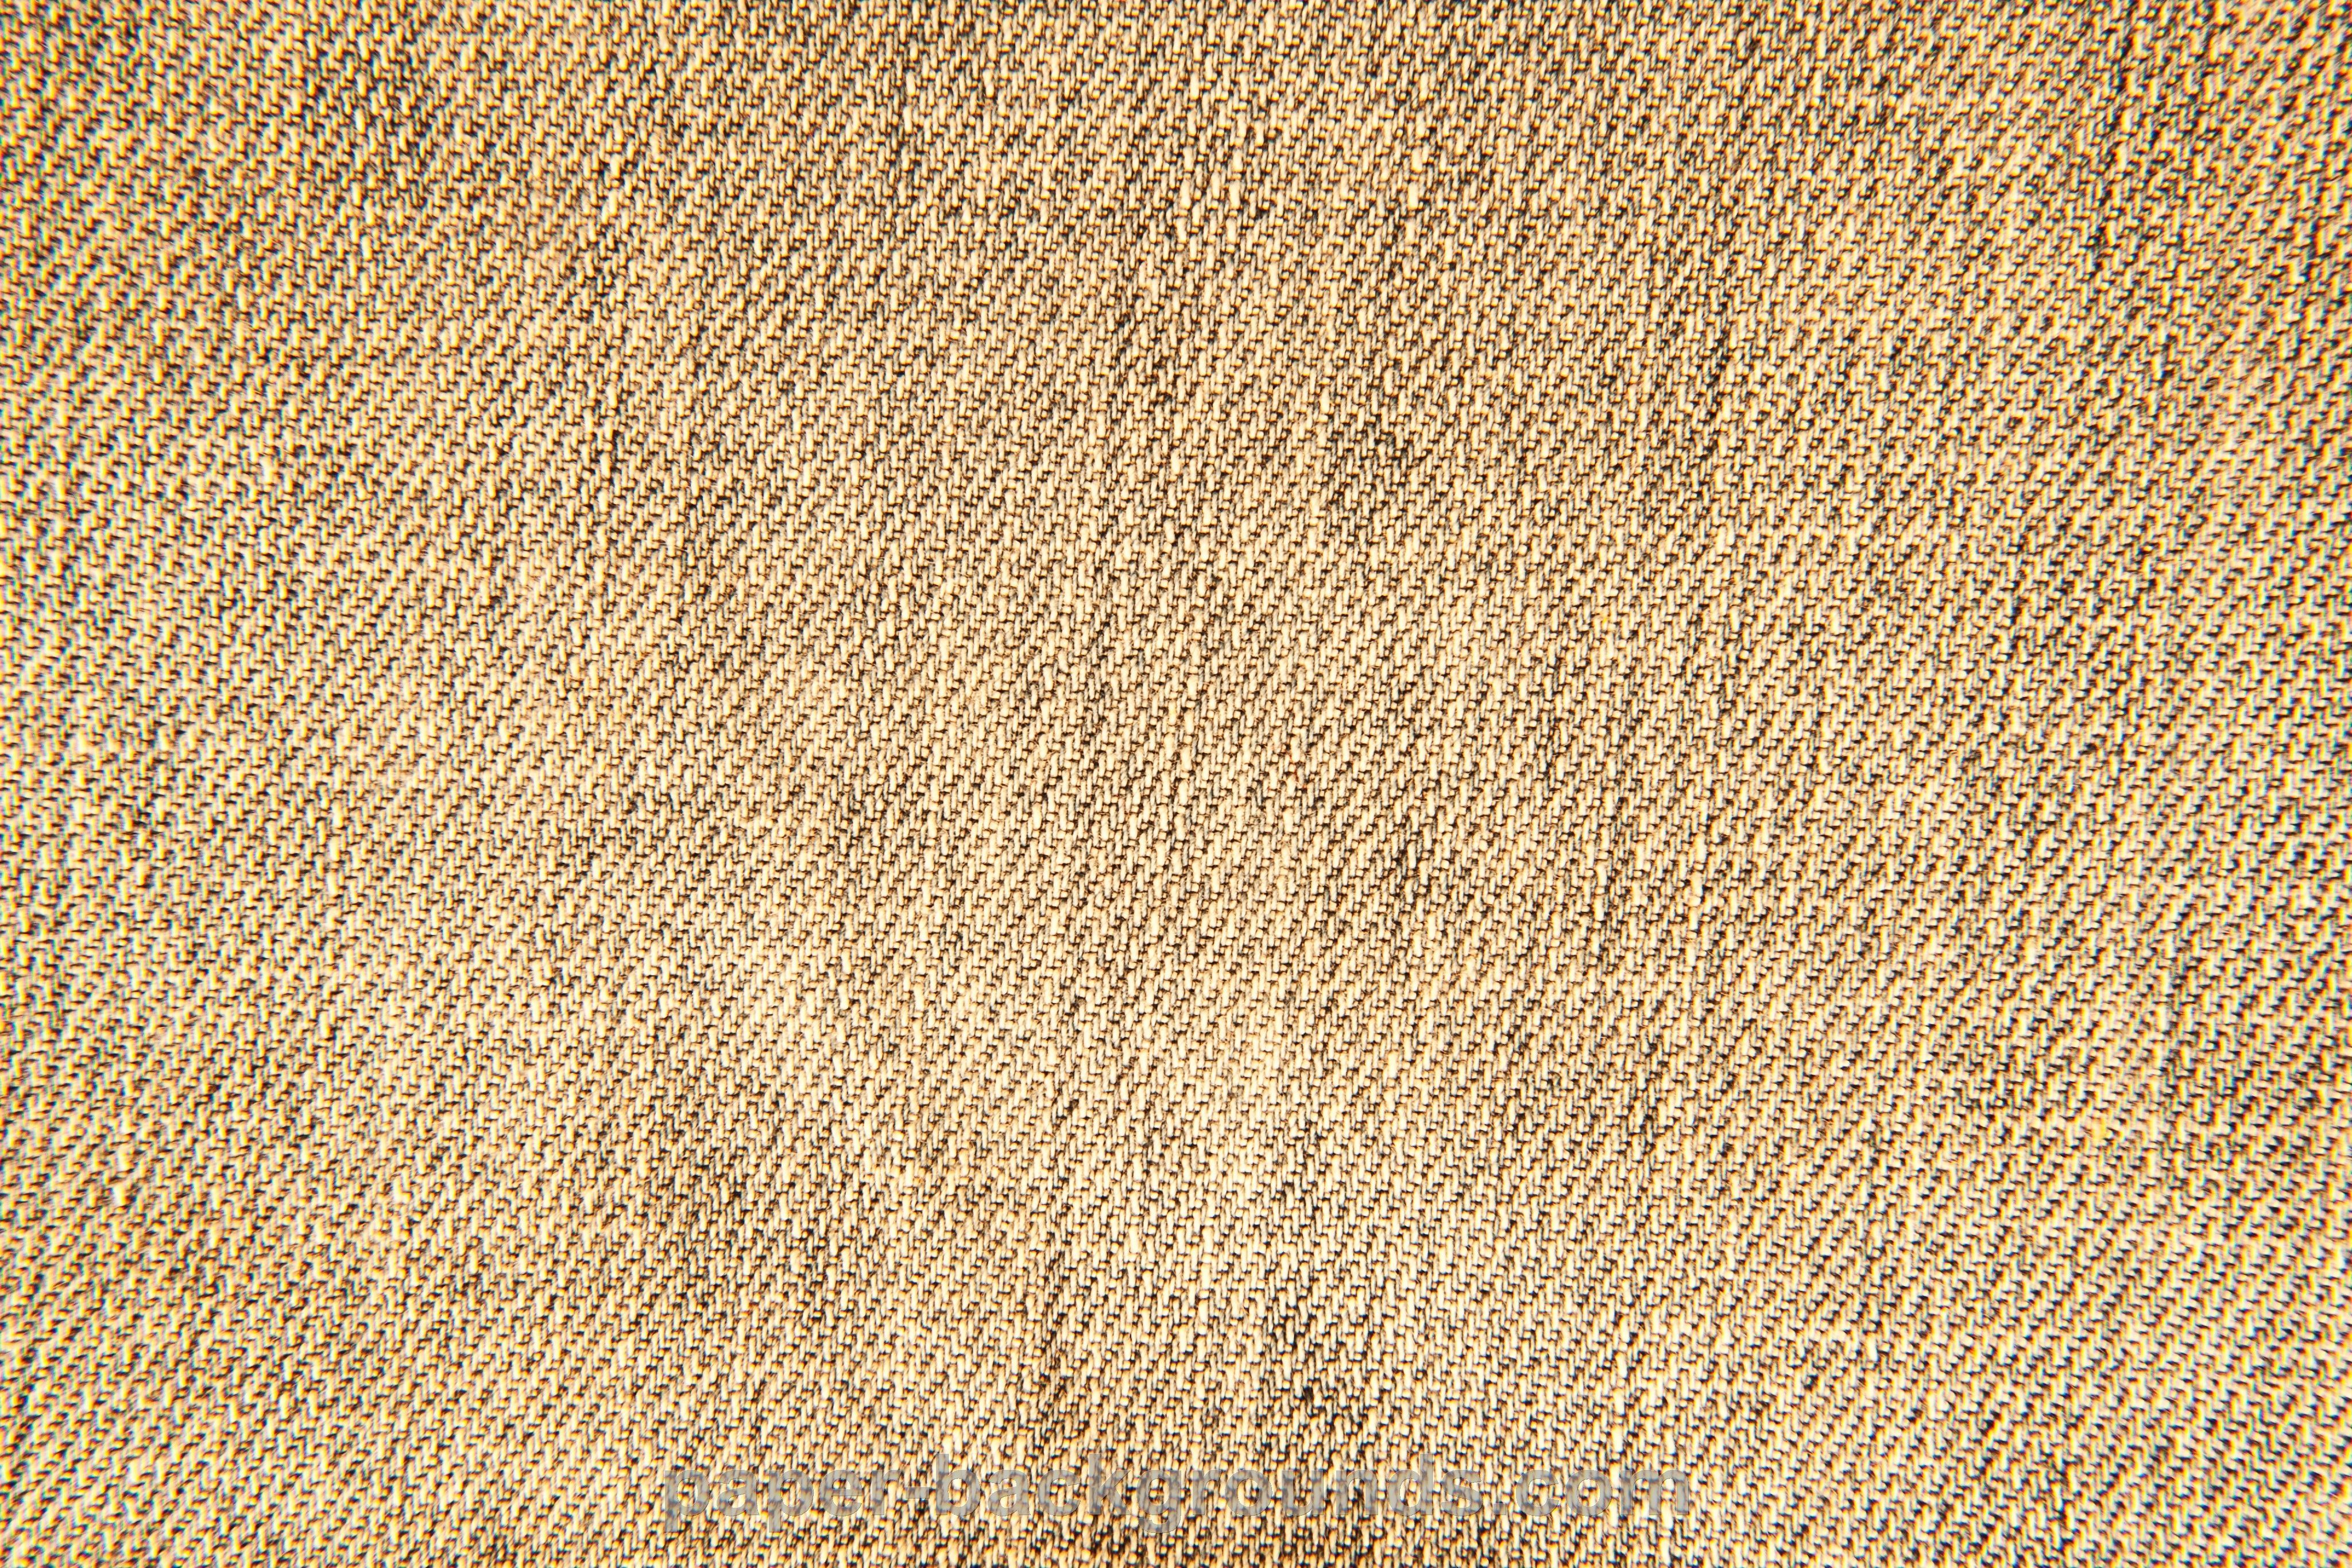 Brown Fabric Texture Background High Resolution Paper